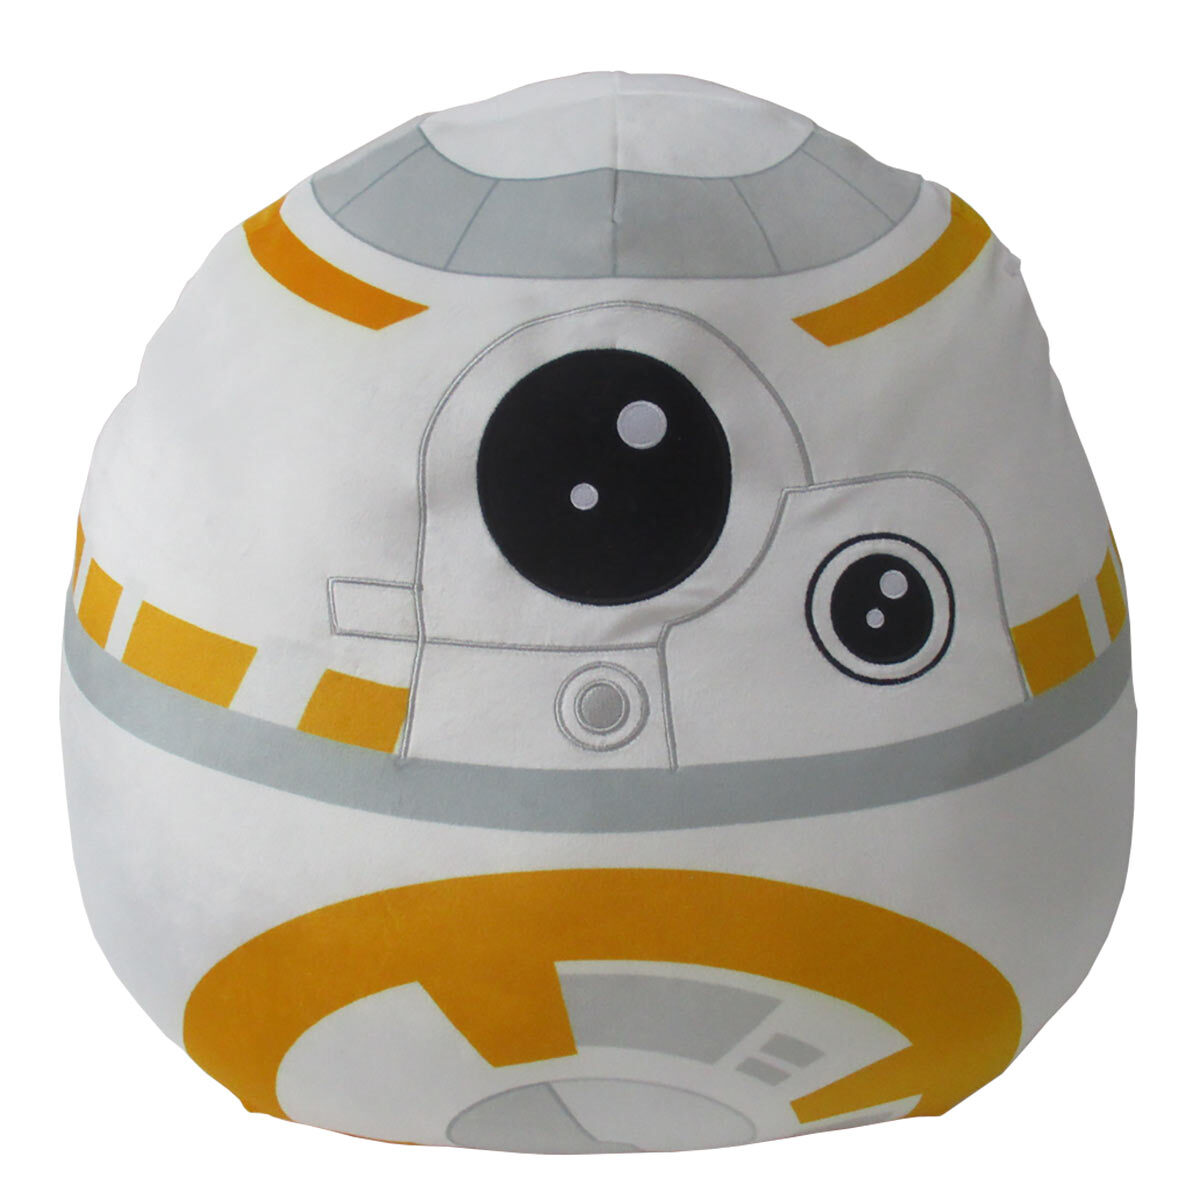 Buy Squishmallow Star Wars 20" BB8 Image at Costco.co.uk